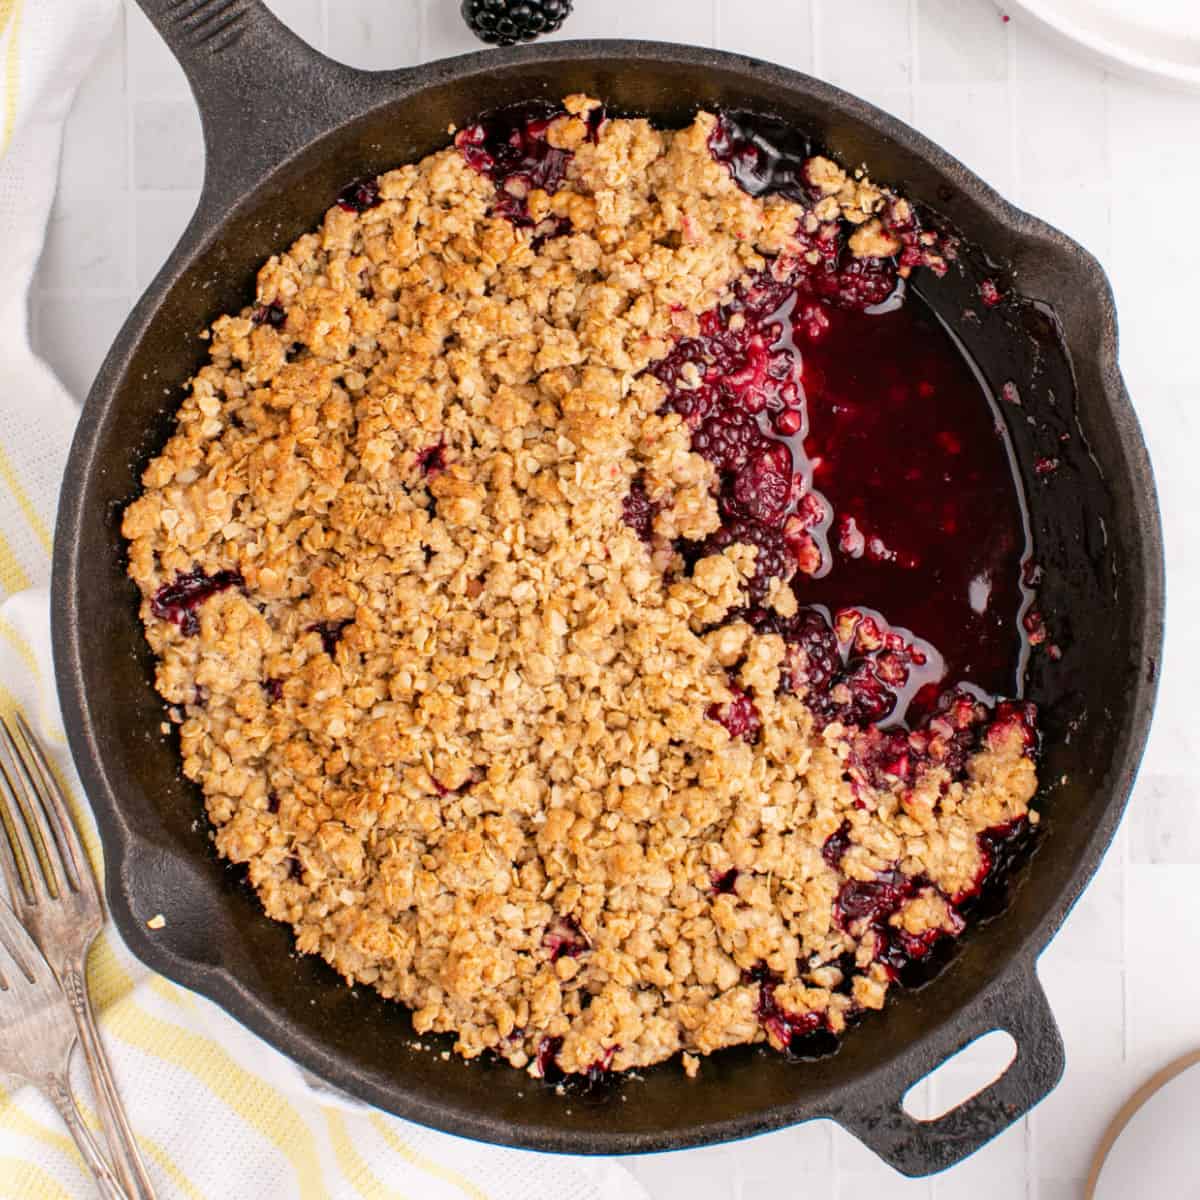 square image of blackberry crumble in a skillet with a portion taken out showing the berries and sauce under the topping